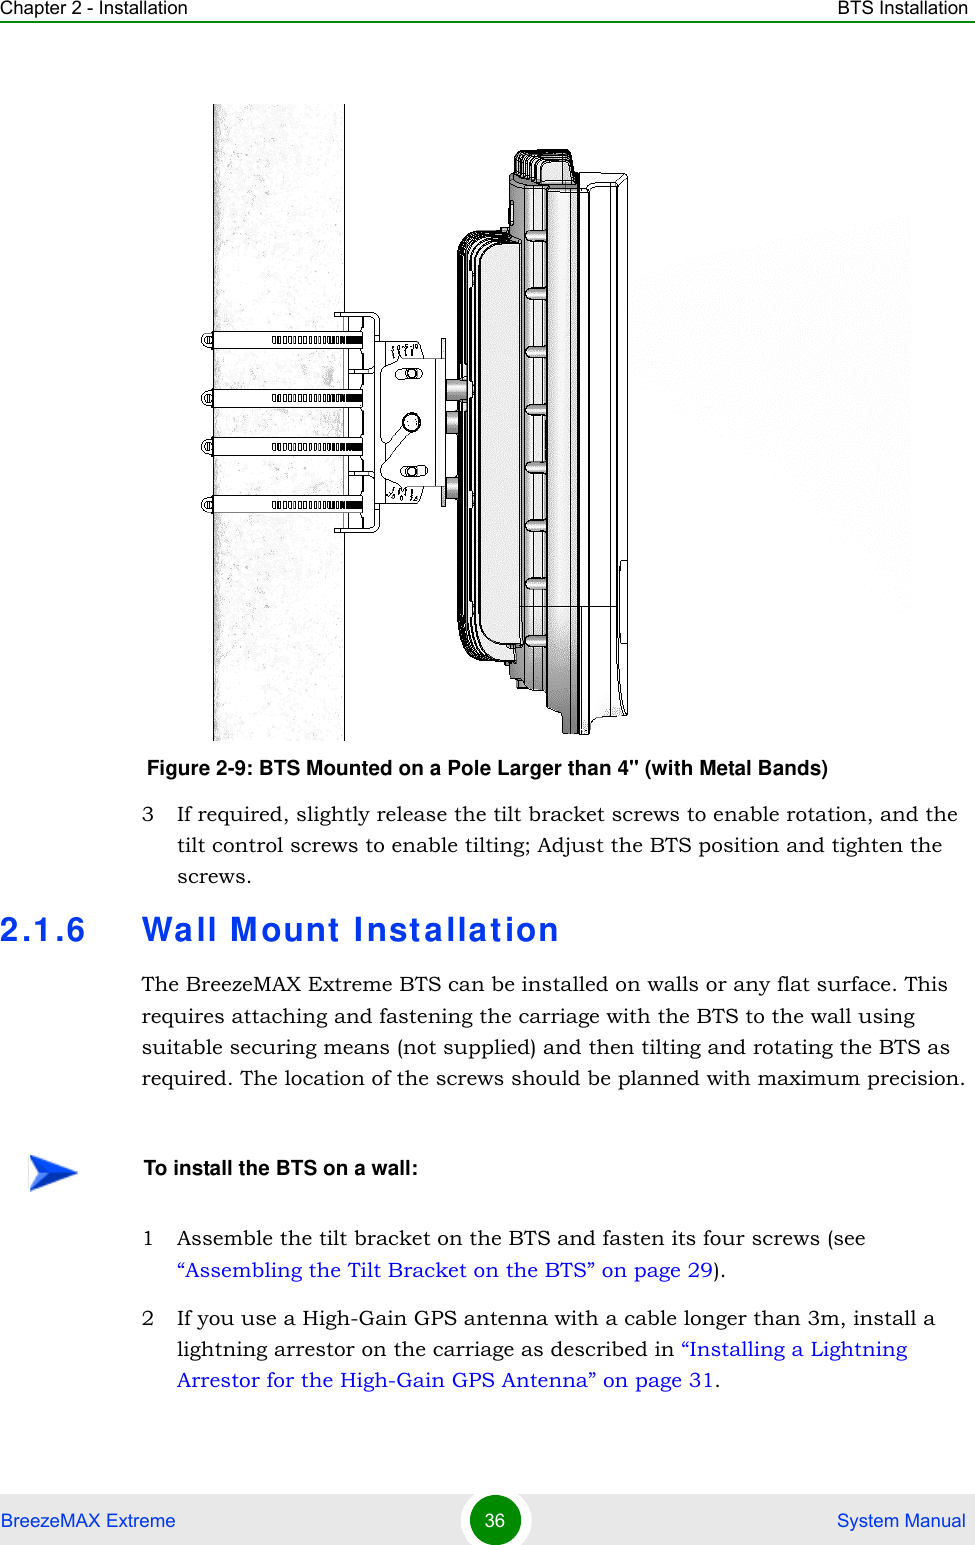 Chapter 2 - Installation BTS InstallationBreezeMAX Extreme 36  System Manual3 If required, slightly release the tilt bracket screws to enable rotation, and the tilt control screws to enable tilting; Adjust the BTS position and tighten the screws.2.1.6 Wall M ount  Inst allationThe BreezeMAX Extreme BTS can be installed on walls or any flat surface. This requires attaching and fastening the carriage with the BTS to the wall using suitable securing means (not supplied) and then tilting and rotating the BTS as required. The location of the screws should be planned with maximum precision.1 Assemble the tilt bracket on the BTS and fasten its four screws (see “Assembling the Tilt Bracket on the BTS” on page 29).2 If you use a High-Gain GPS antenna with a cable longer than 3m, install a lightning arrestor on the carriage as described in “Installing a Lightning Arrestor for the High-Gain GPS Antenna” on page 31.Figure 2-9: BTS Mounted on a Pole Larger than 4&apos;&apos; (with Metal Bands)To install the BTS on a wall: